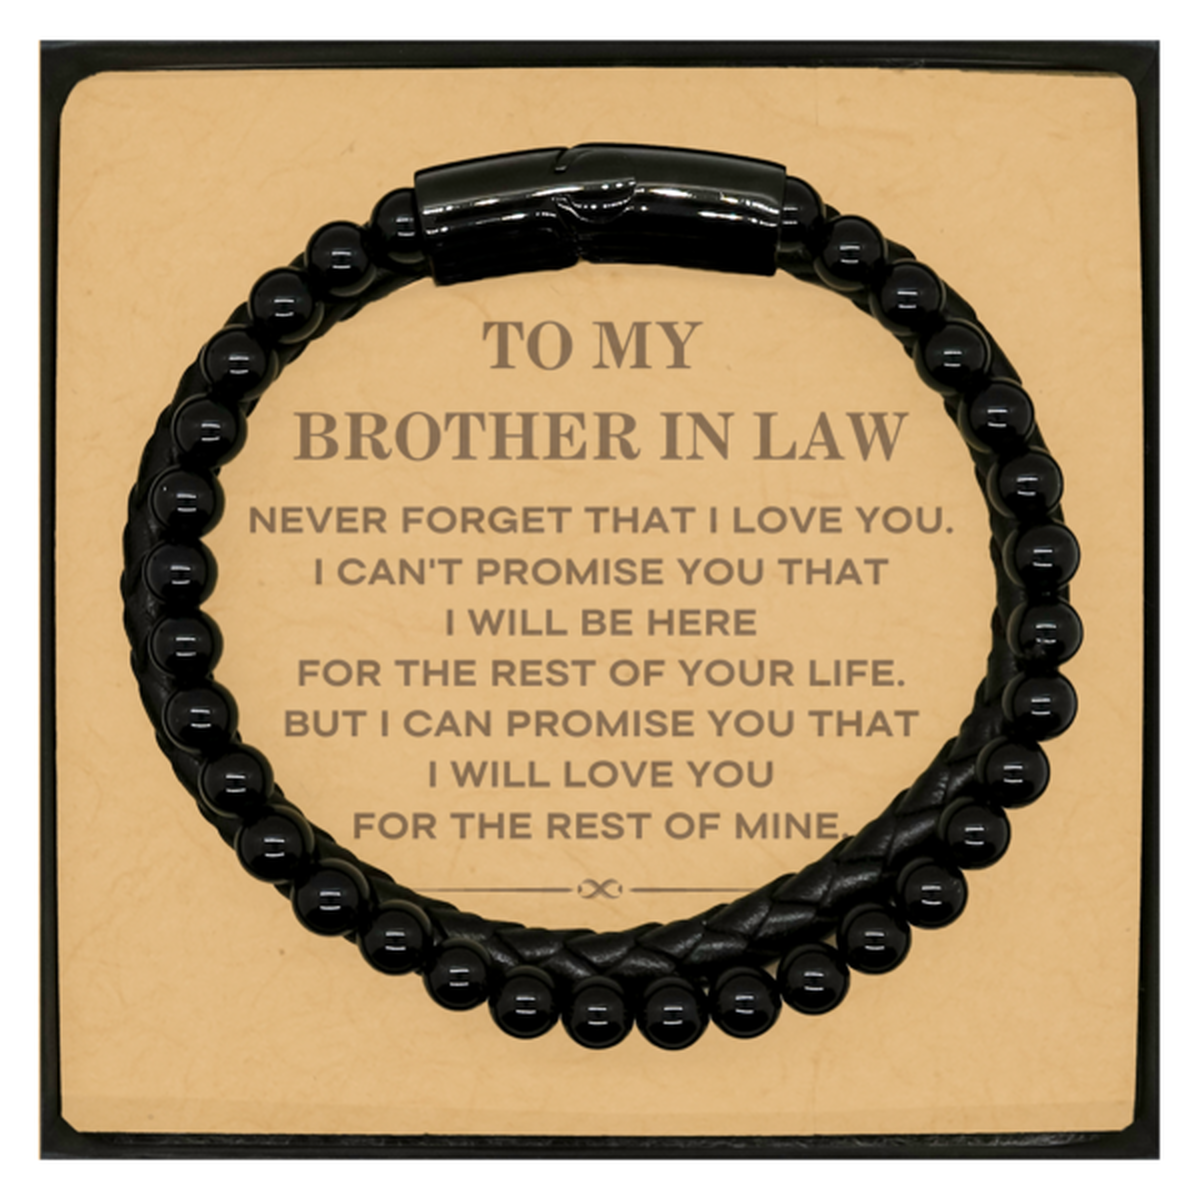 To My Brother In Law Gifts, I will love you for the rest of mine, Love Brother In Law Bracelet, Birthday Christmas Unique Stone Leather Bracelets For Brother In Law